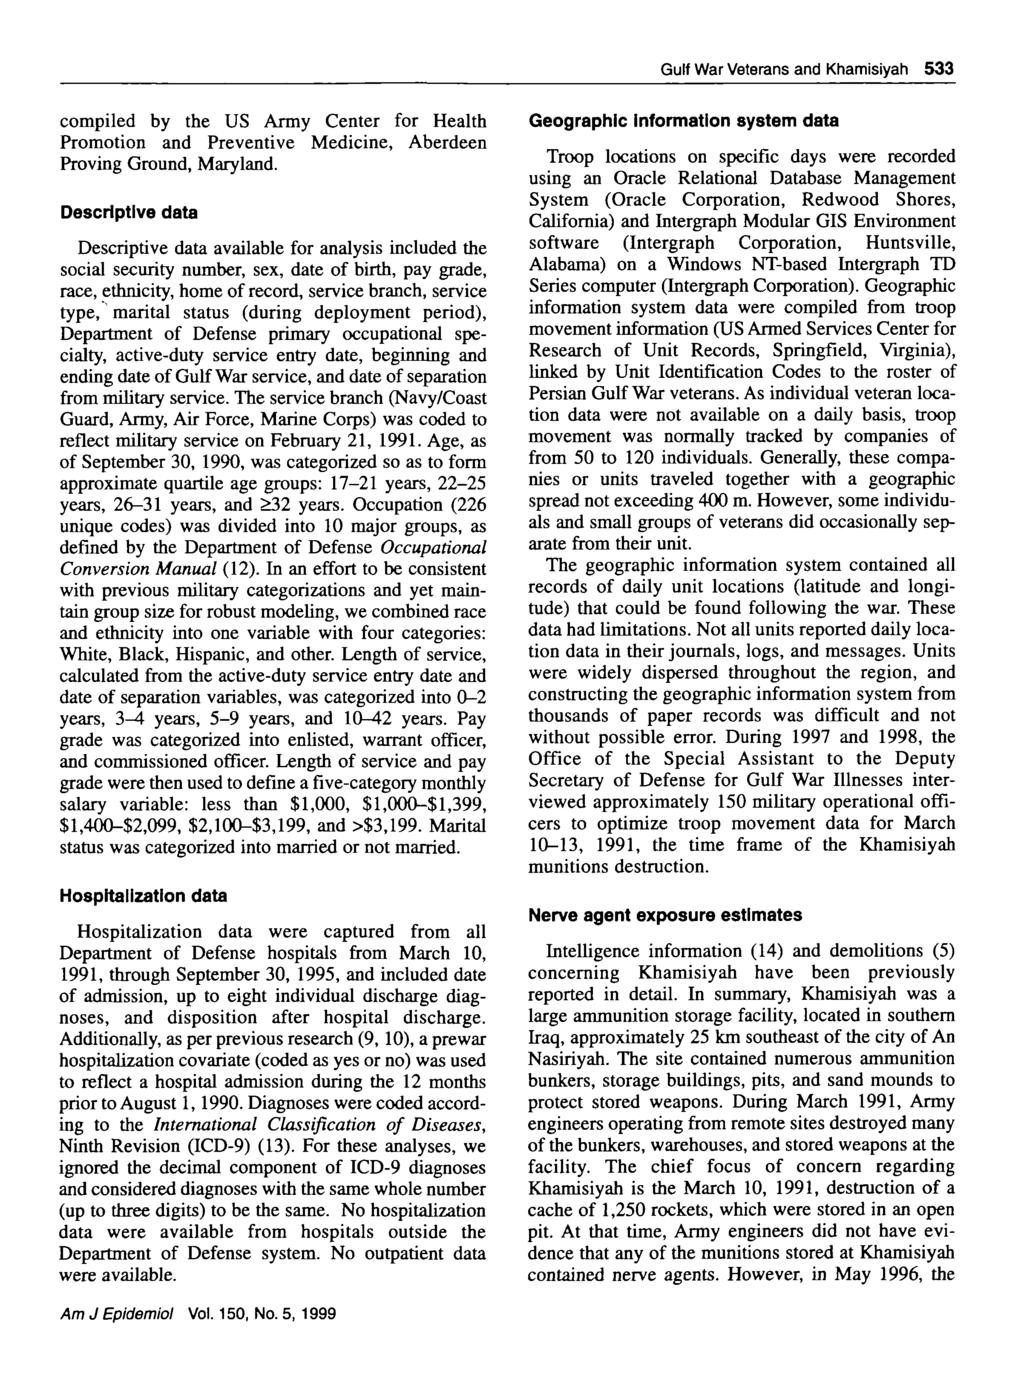 Gulf War Veterans and Khamisiyah 533 compiled by the US Army Center for Health Promotion and Preventive Medicine, Aberdeen Proving Ground, Maryland.